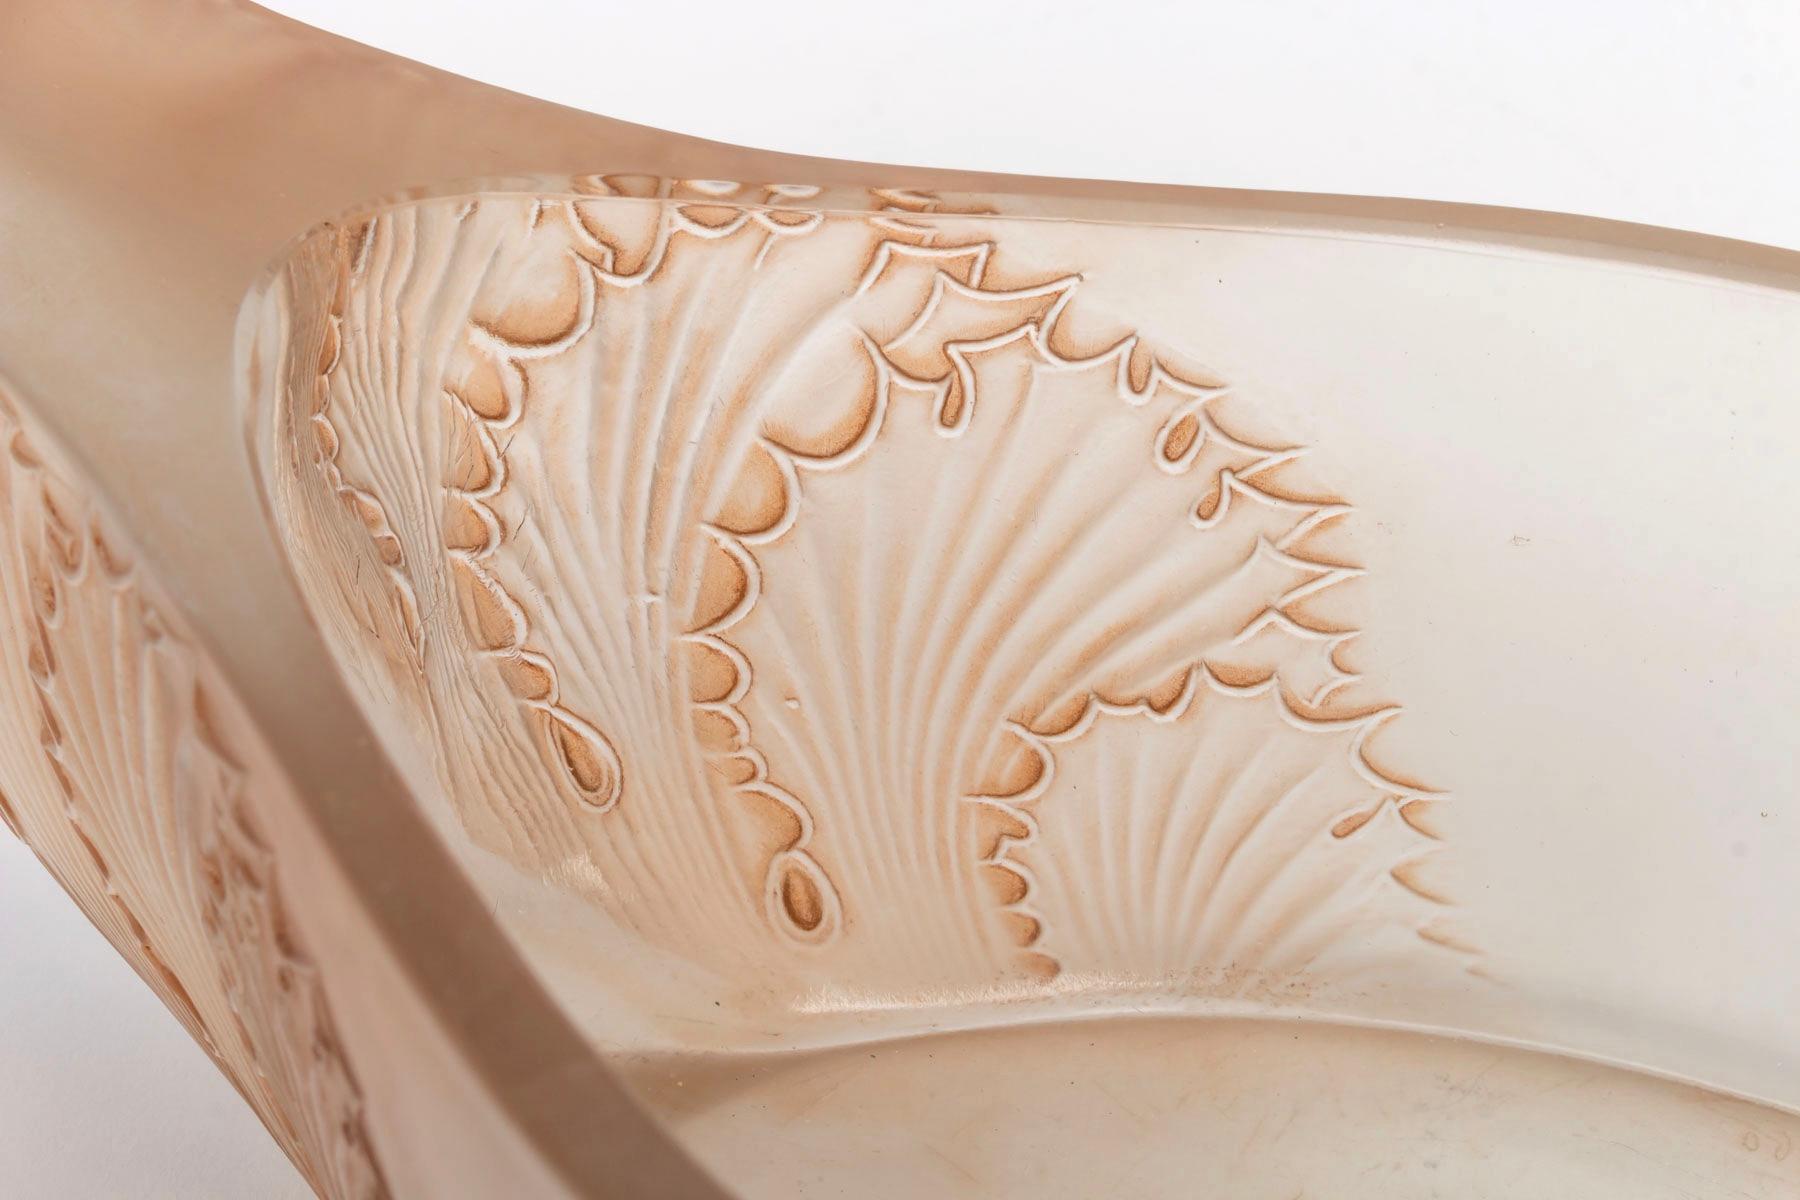 Early 20th Century 1927 René Lalique Acanthes Jardinière Bowl Frosted Glass with Sepia Patina